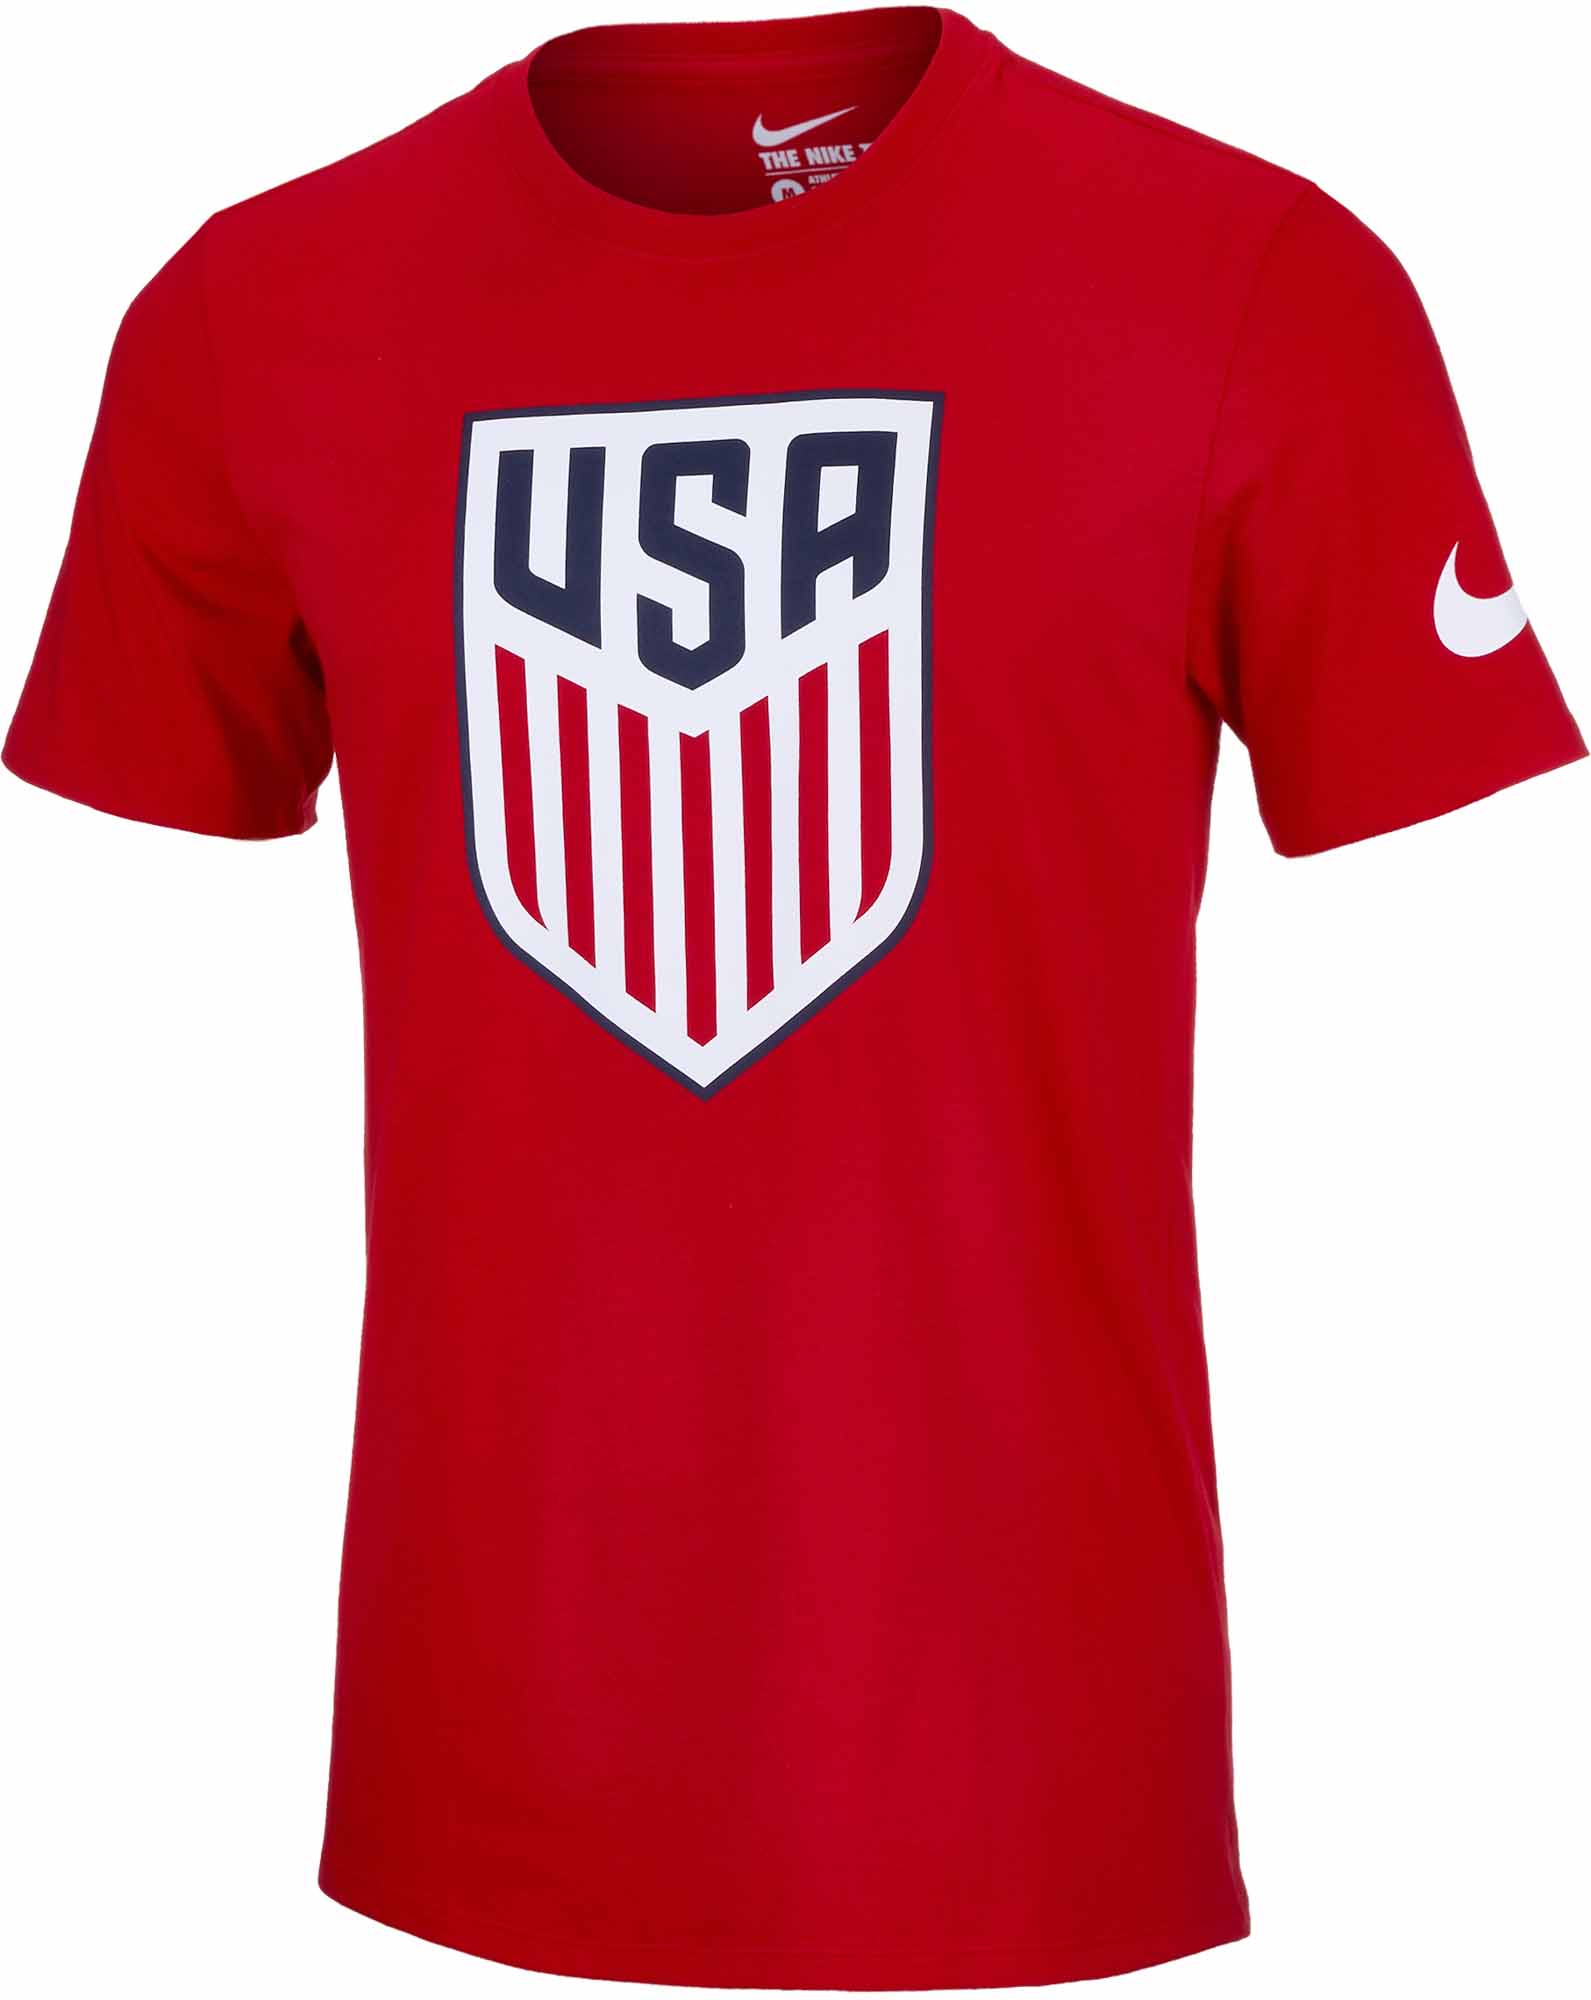 es suficiente Cariñoso He aprendido Nike USA Evergreen Crest Tee - Red USA Soccer T-Shirts